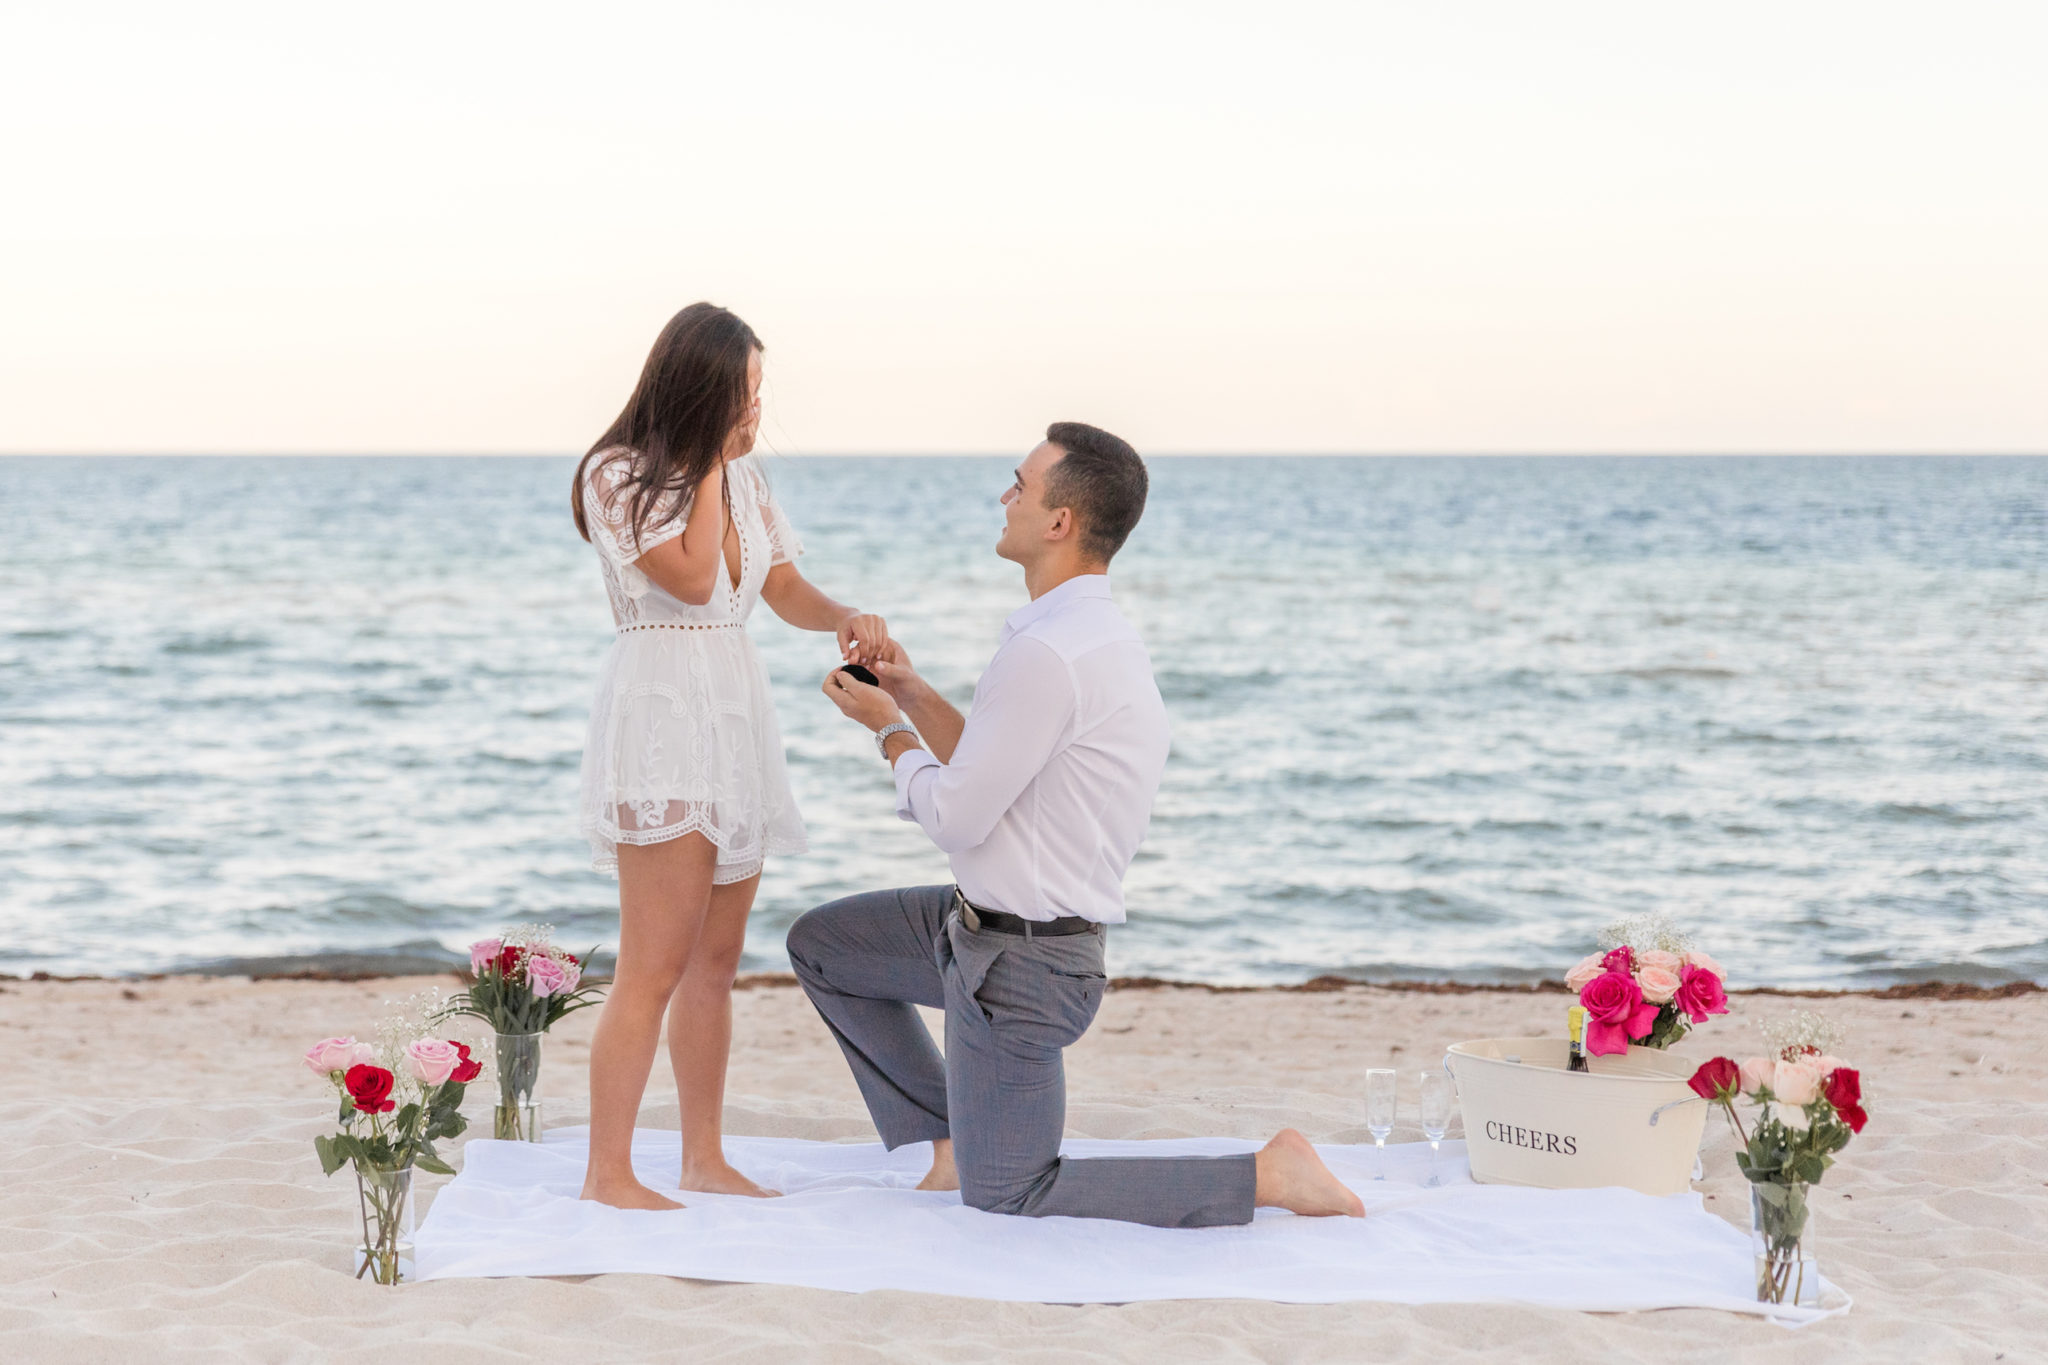 The Marriage Proposal Site How to propose, how to propose book, how to